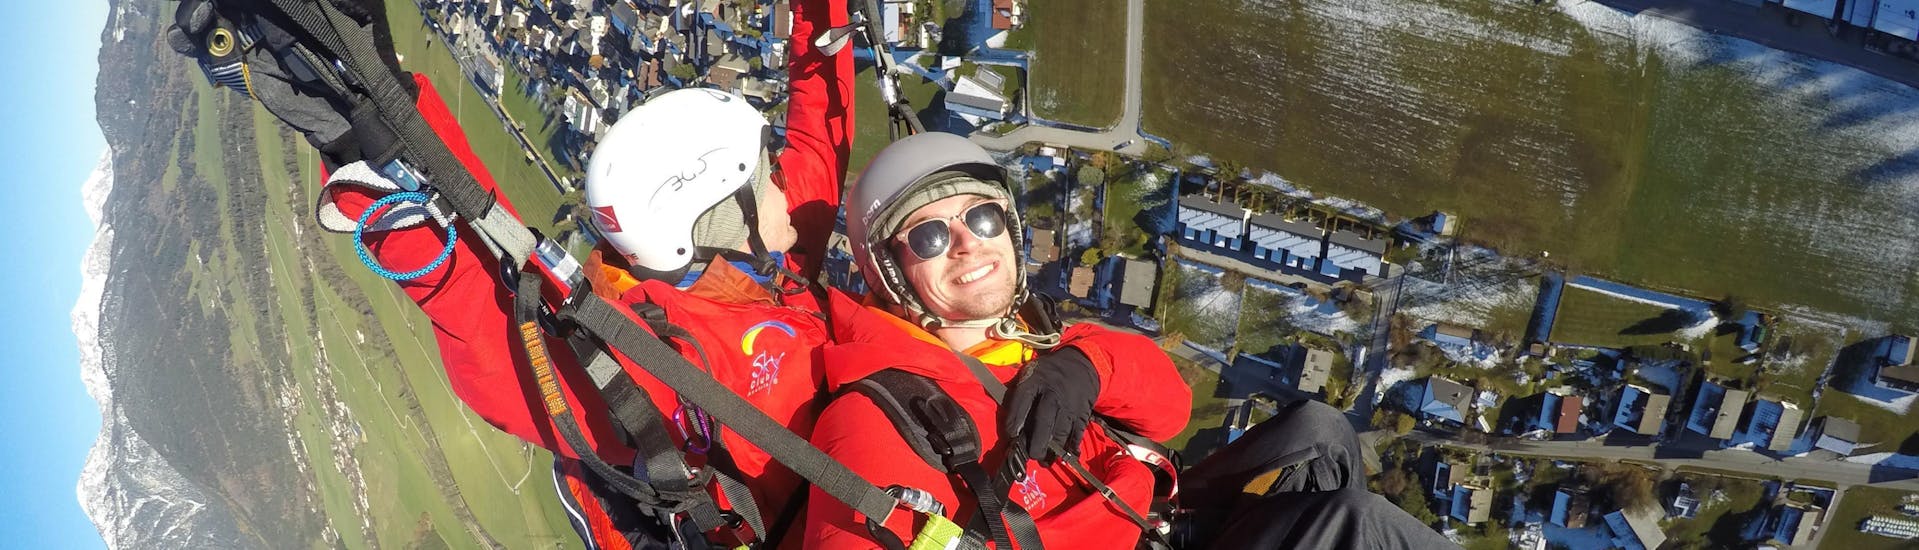 A customer smiles into the camera while the pilot safely steers the paraglider during the tandem paragliding from Stoderzinken with Flugschule Sky Club Austria Gröbming.